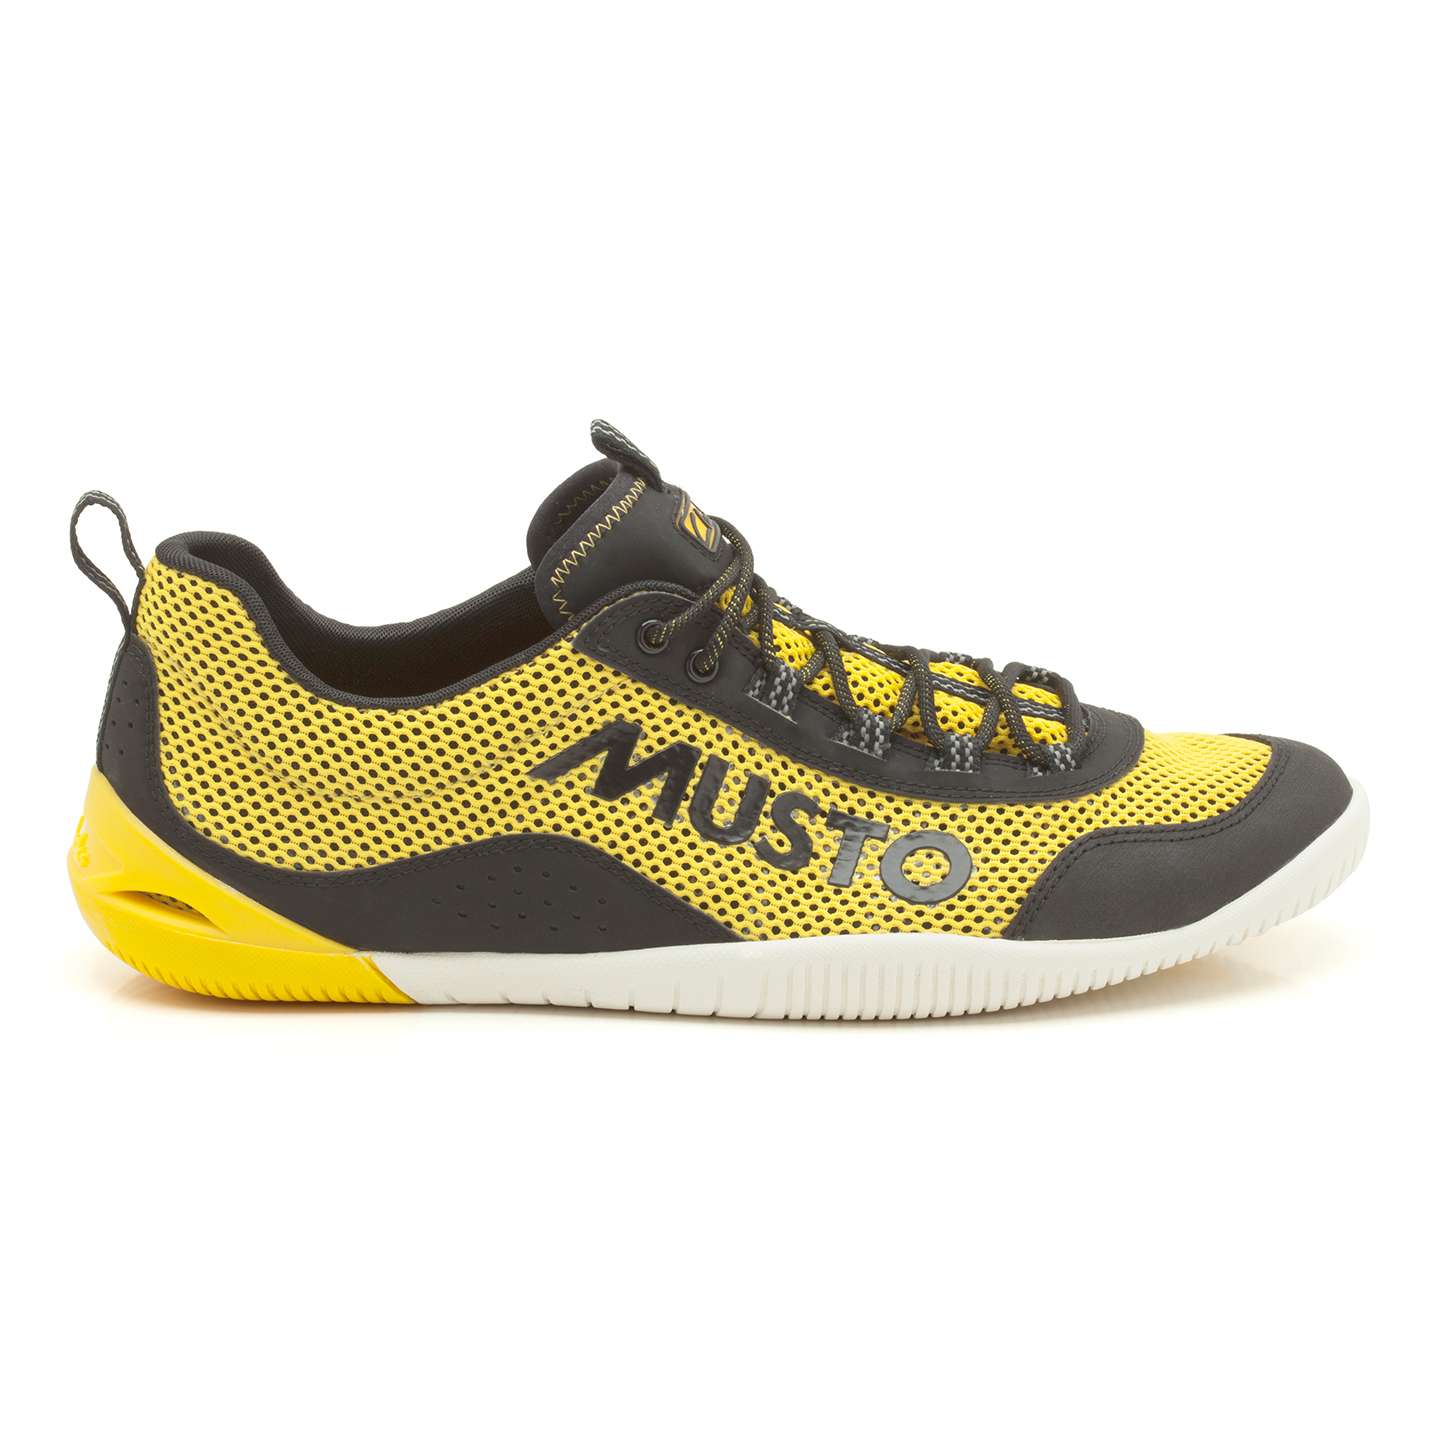 musto boots sale